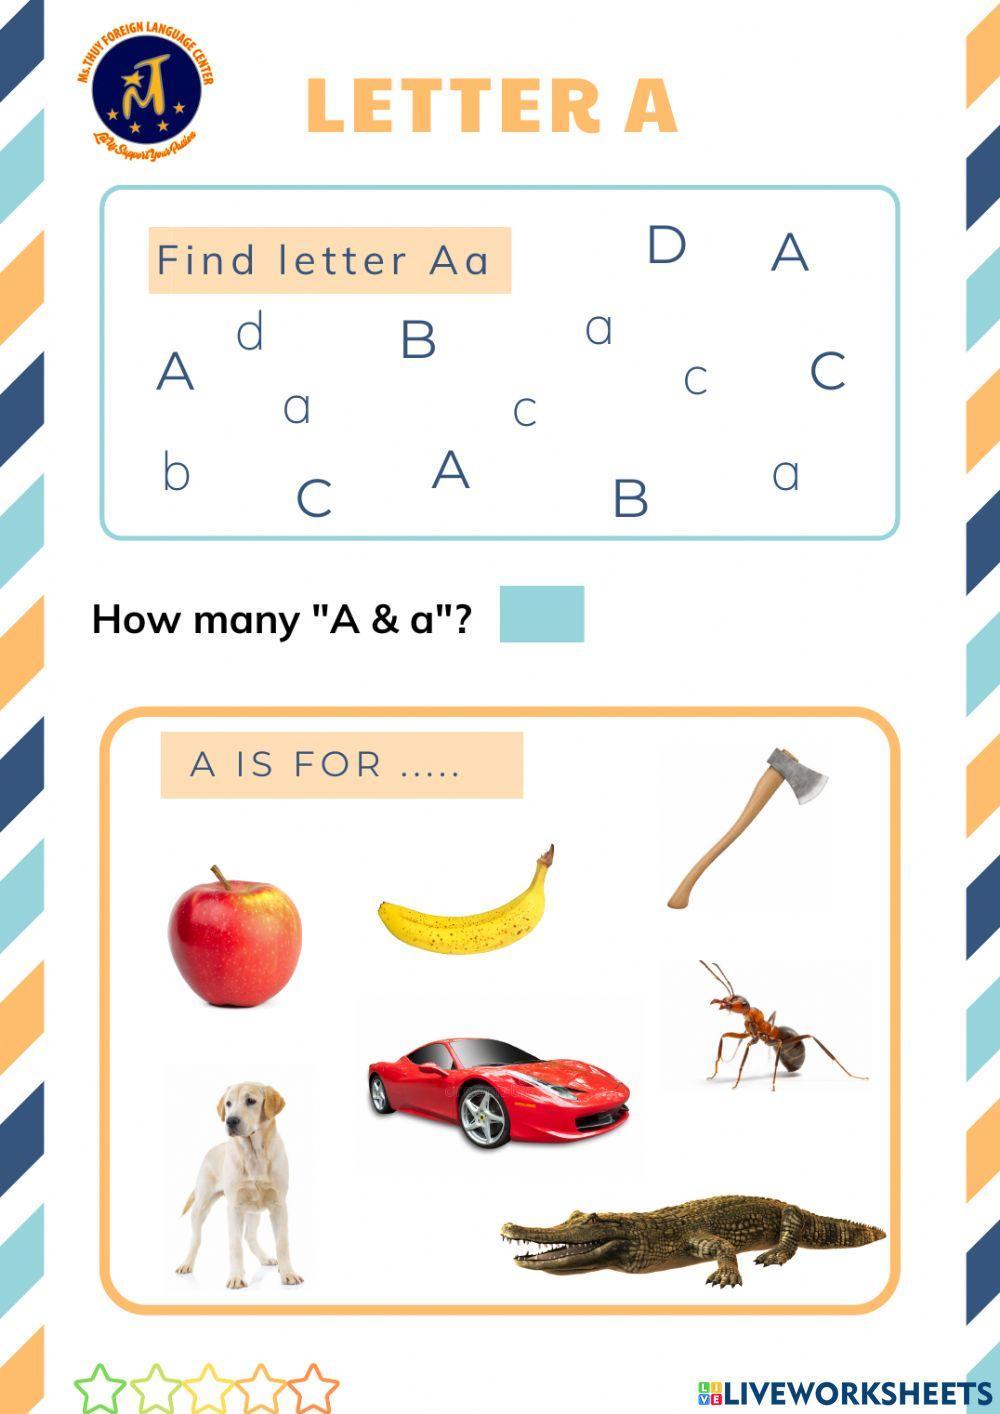 Find Letter Aa